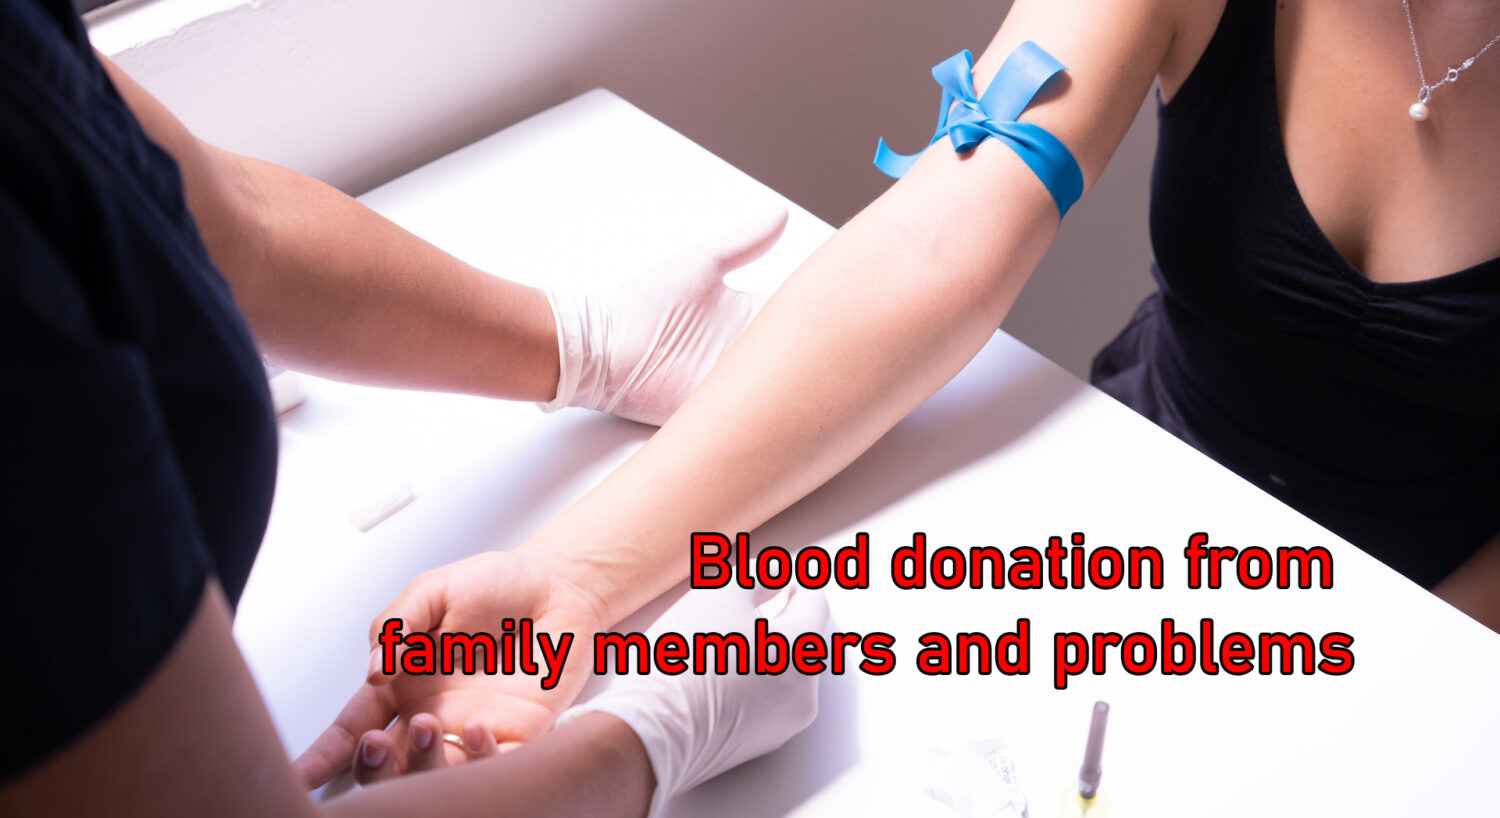 Blood donation from family members and problems